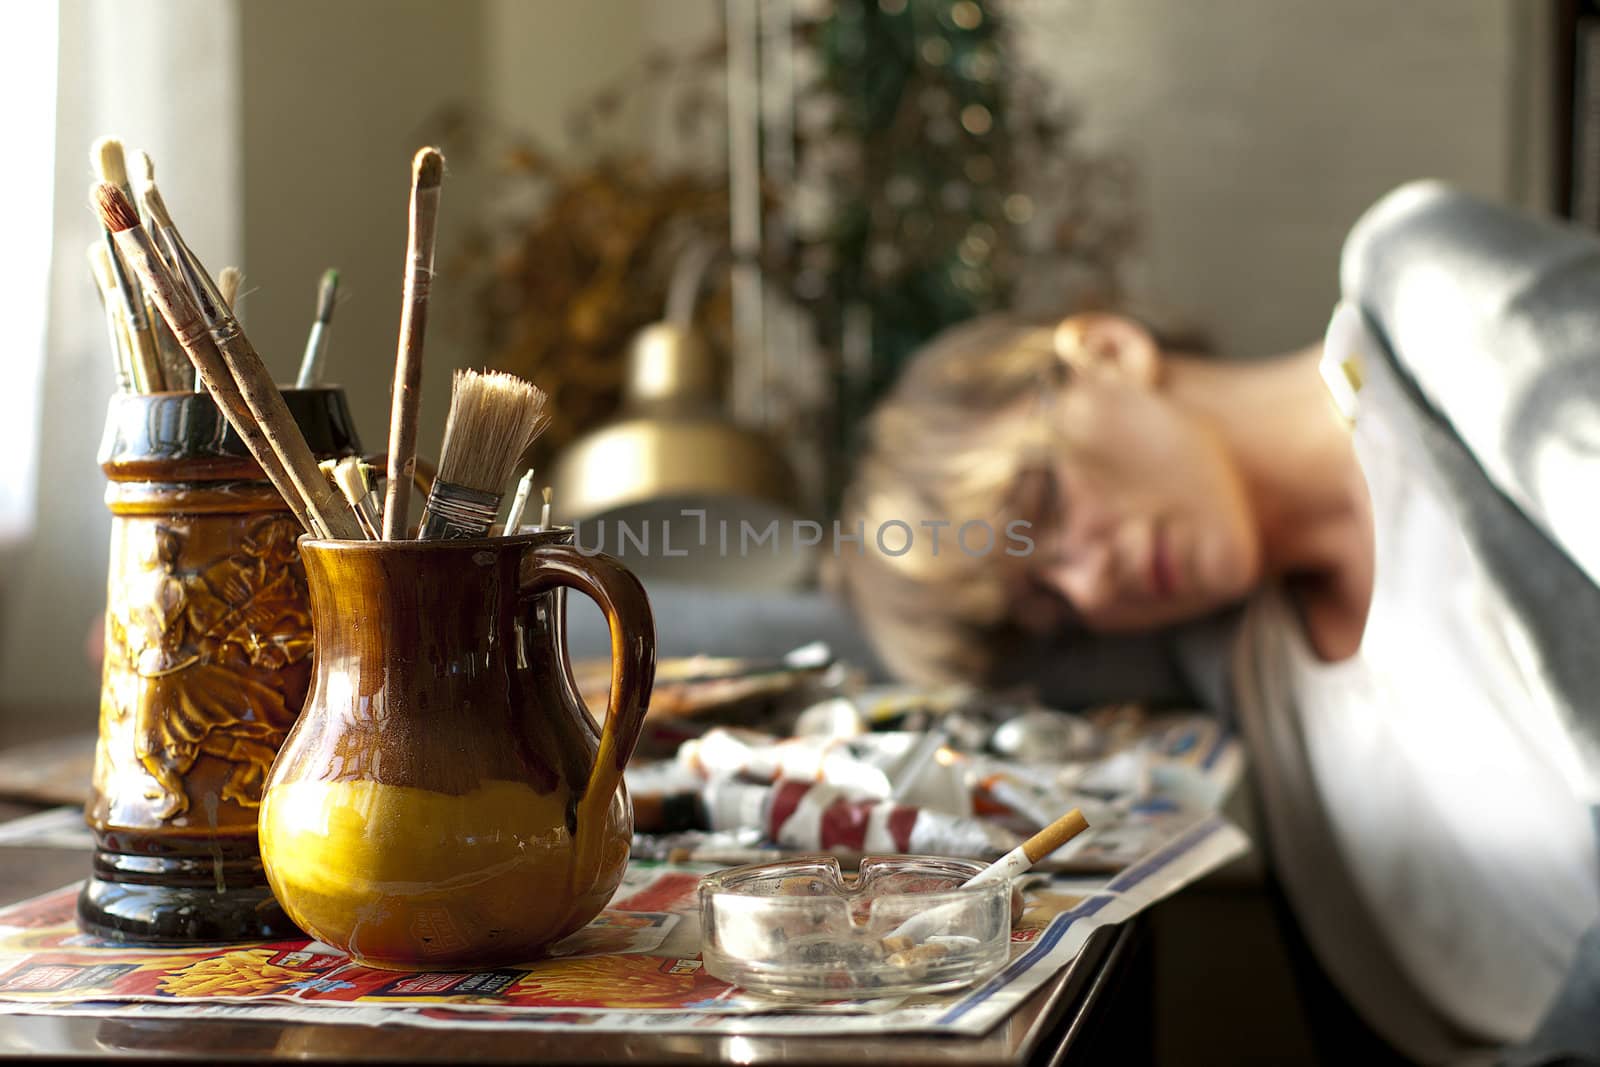 An artist sleeping on the table full of painting accessories.